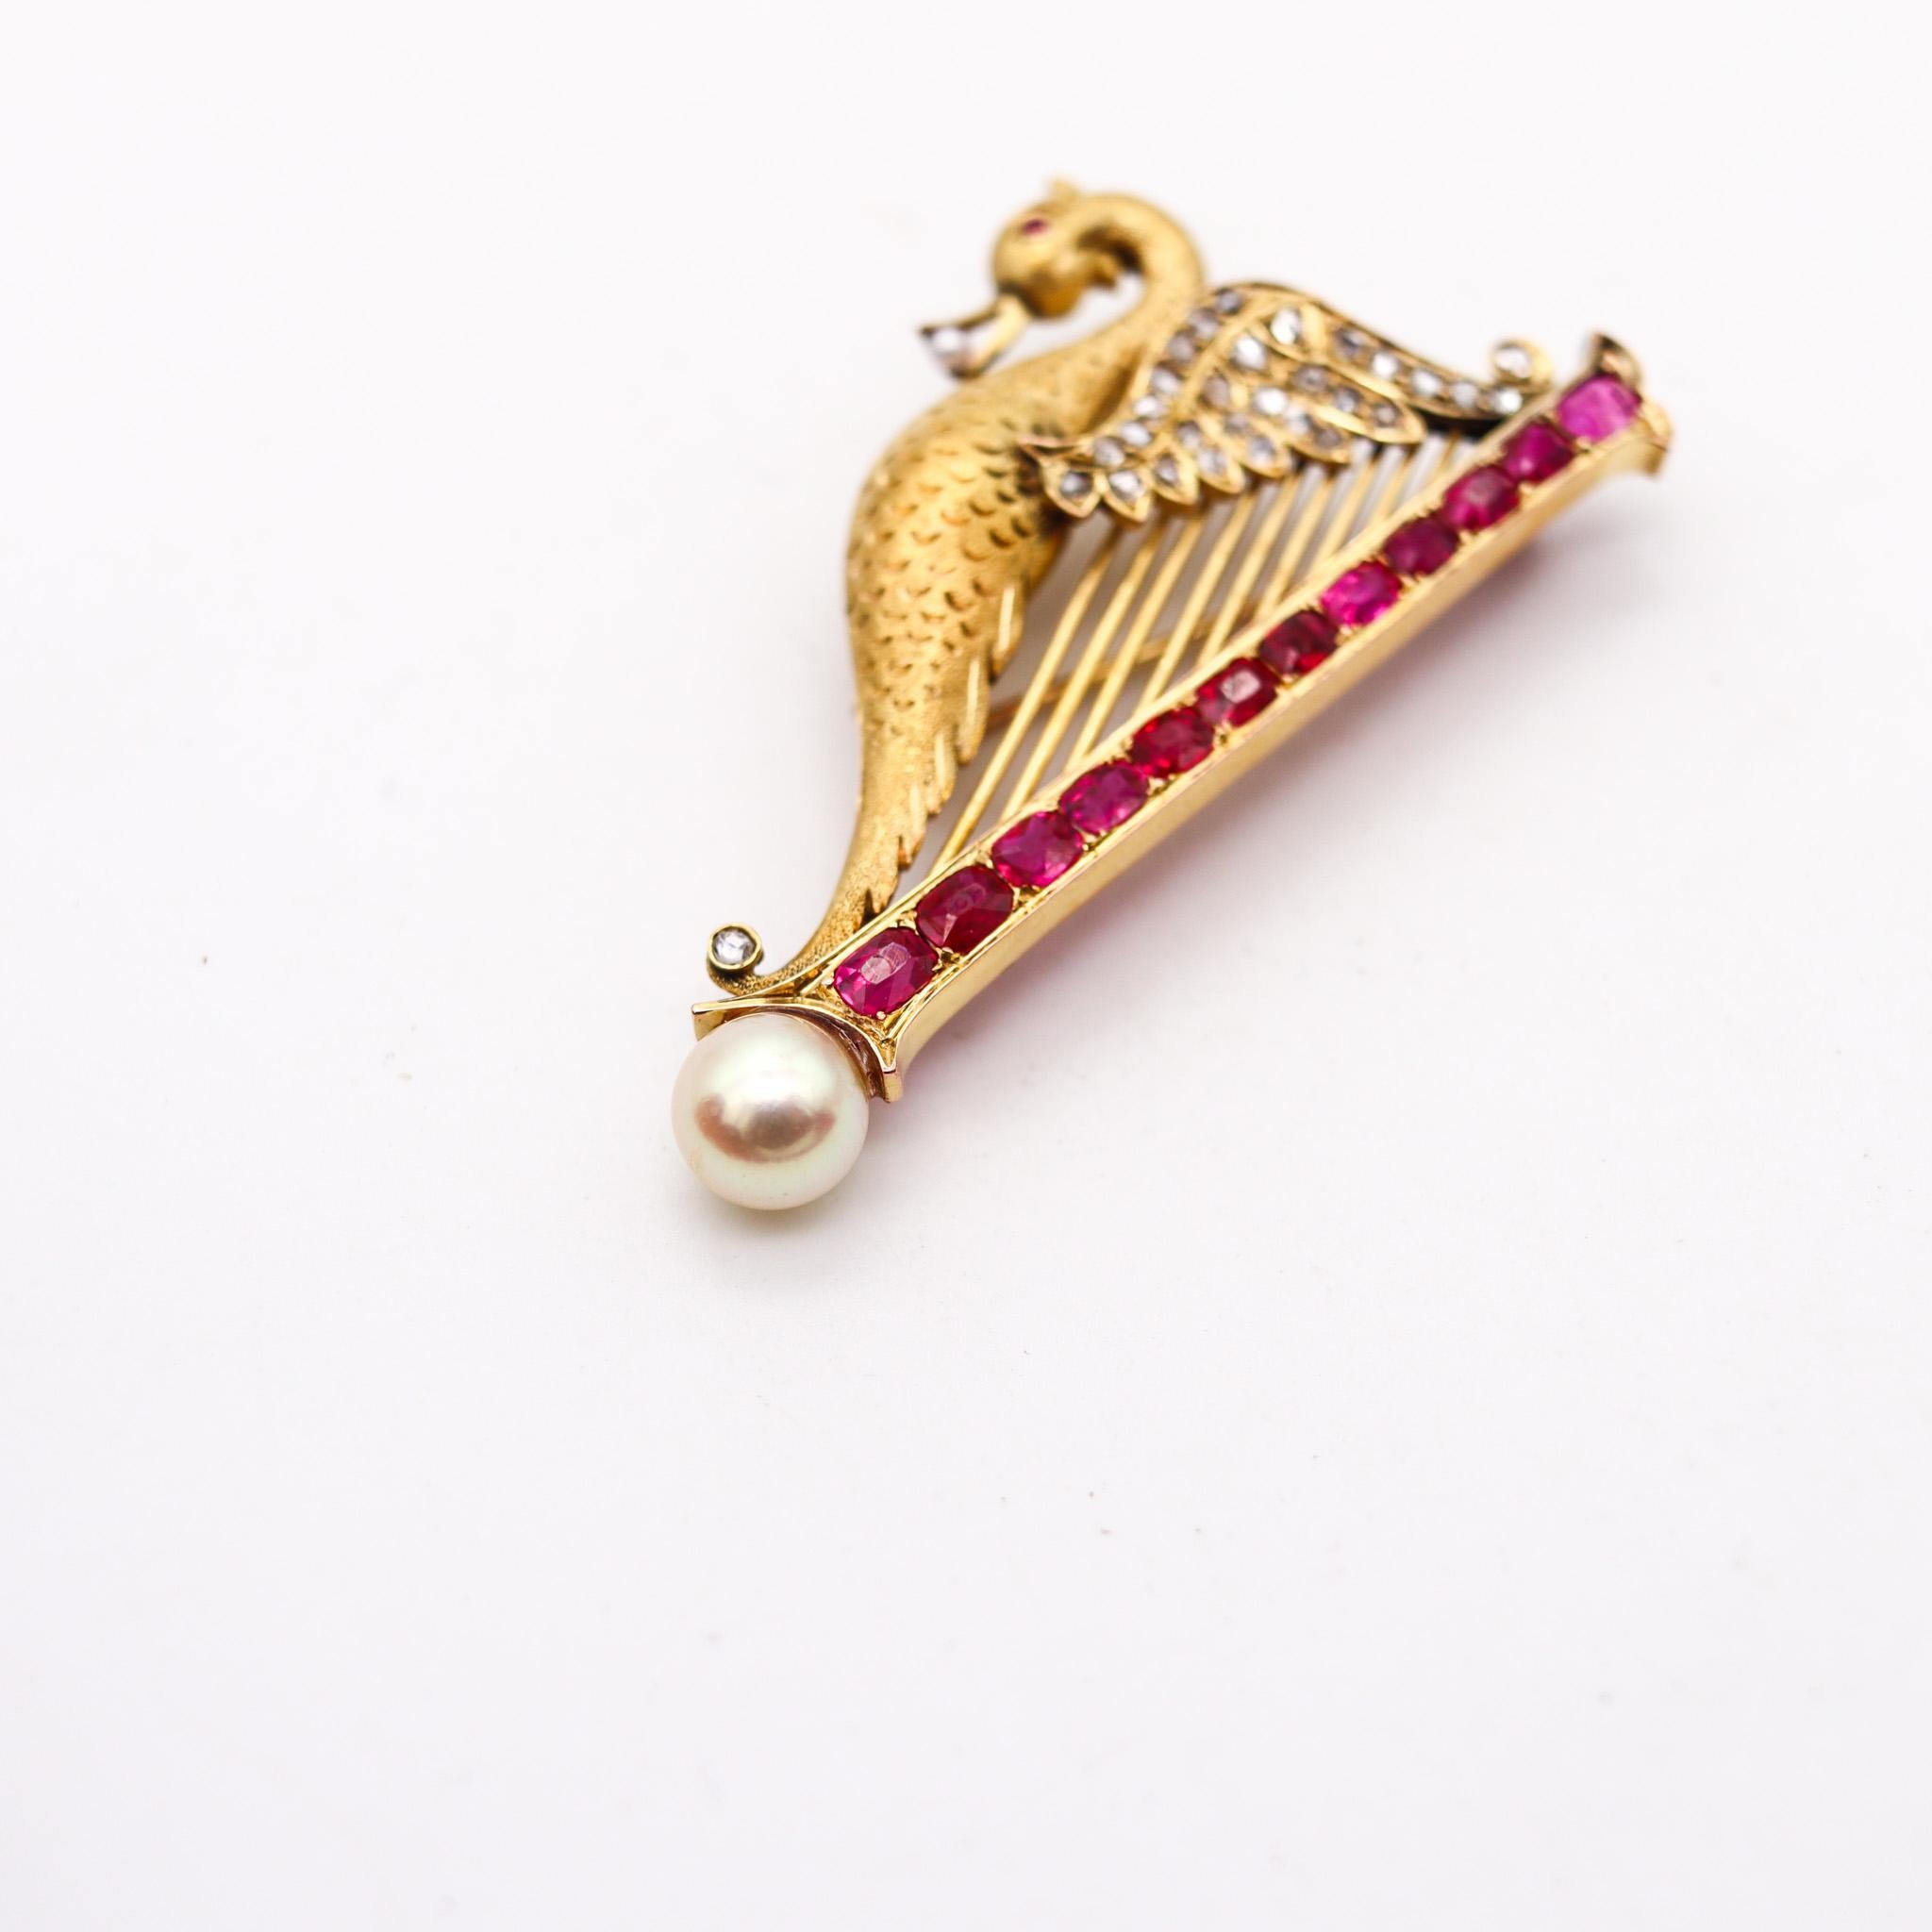 French Cut French 1890 Art Nouveau Swan Arp Brooch 18Kt Gold With 5.05 Ctw Rubies Diamonds For Sale